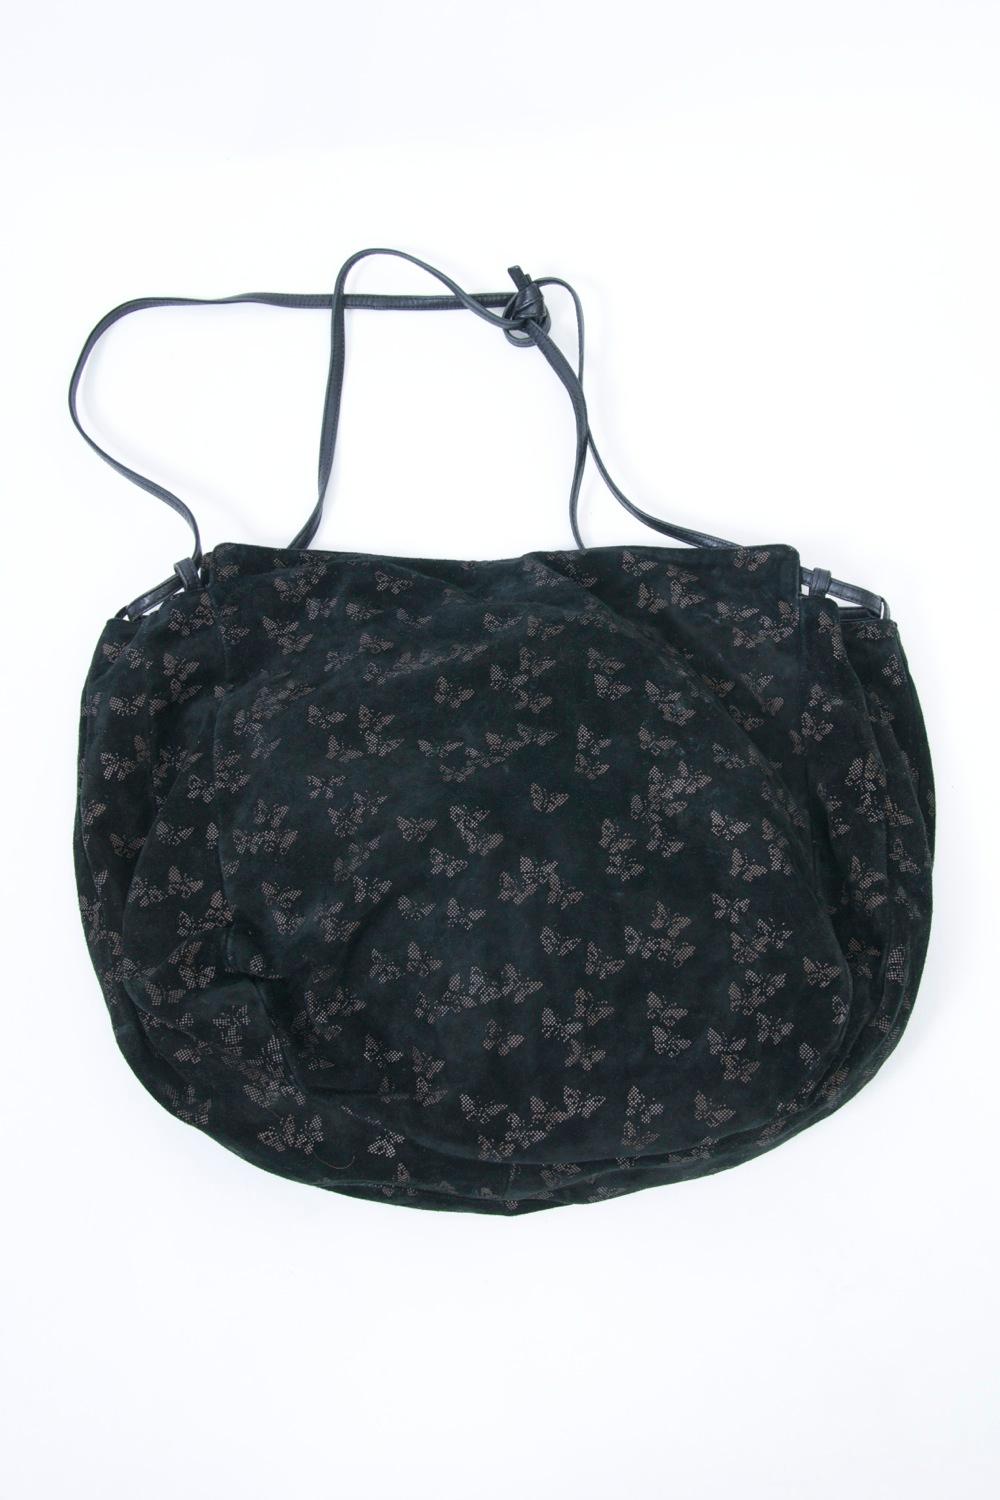 Roomy pouch shoulder bag by Bottega Veneta in black suede with a light butterfly motif throughout. A black leather cord looks through the top to provide double straps that are adjustable. Snap closure. Interior has a zippered side compartment.